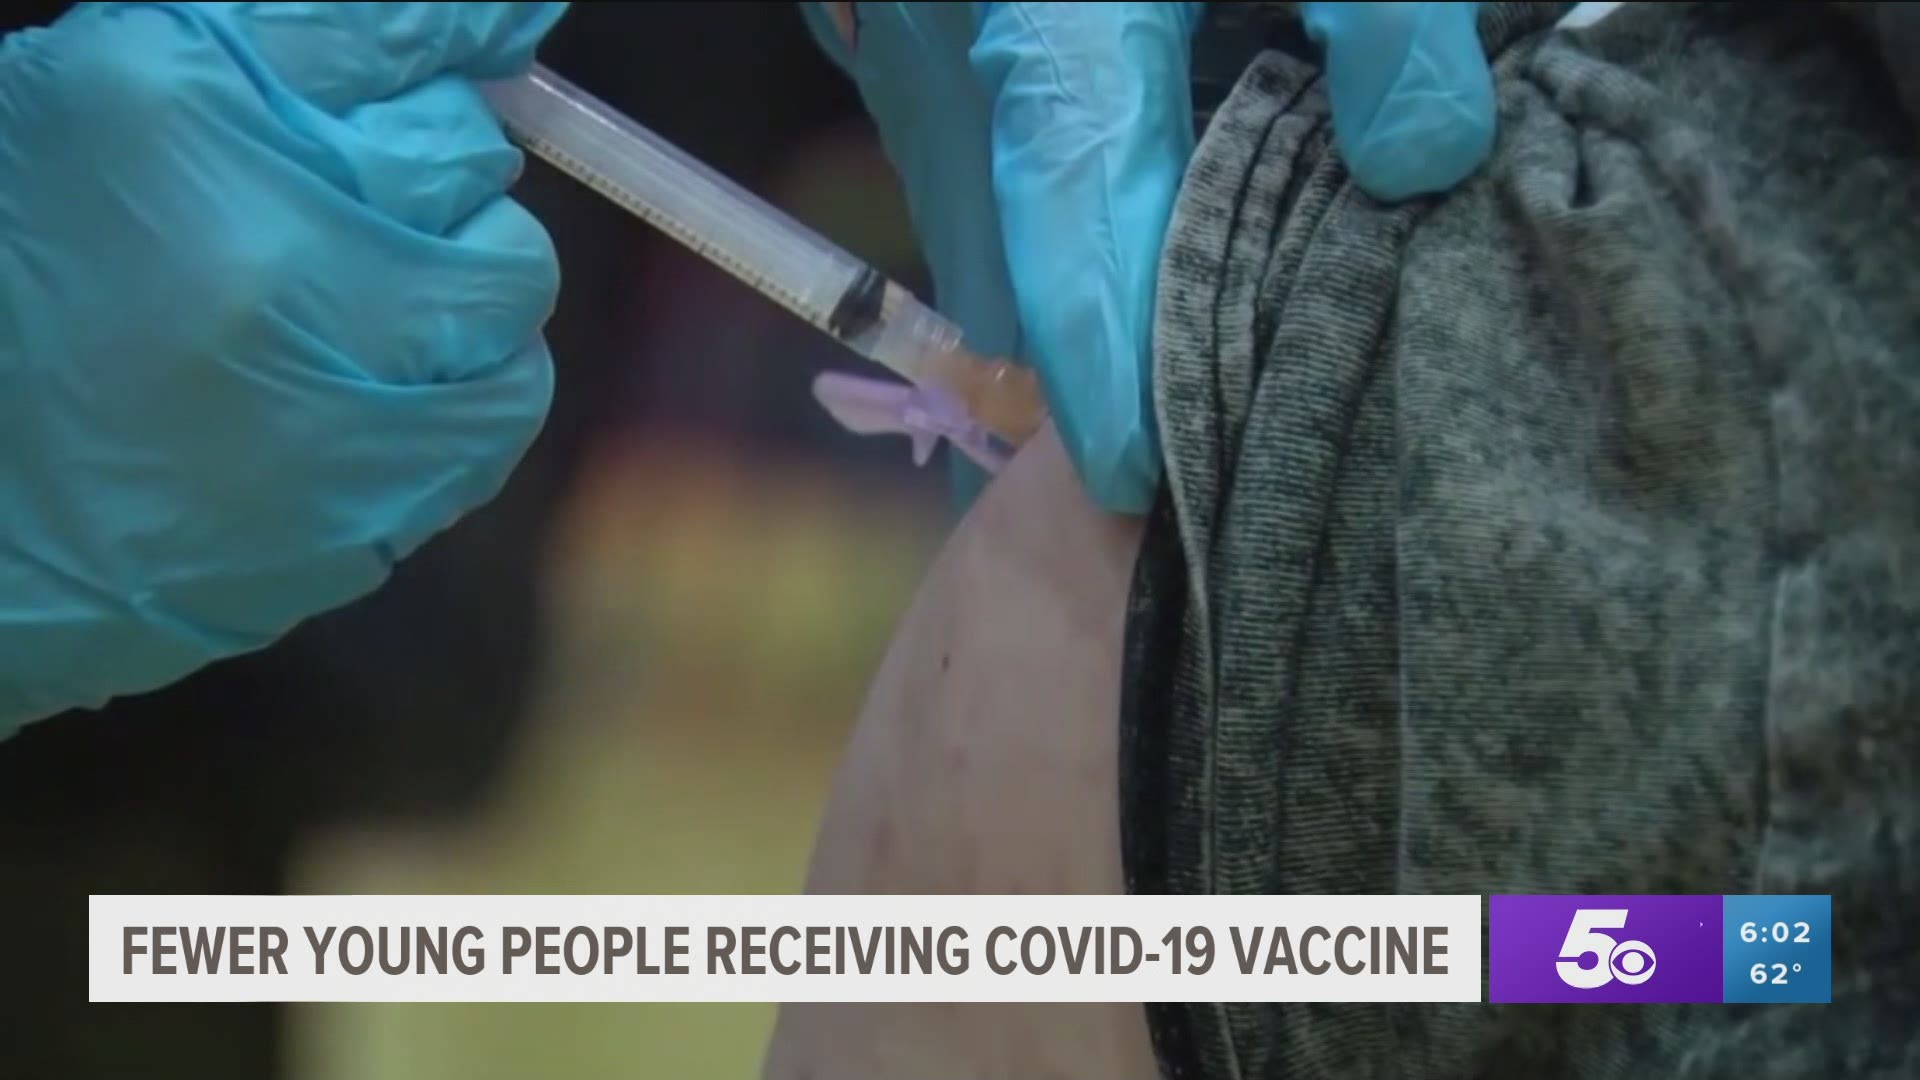 Fewer young people in Arkansas are receiving the Covid-19 vaccine.